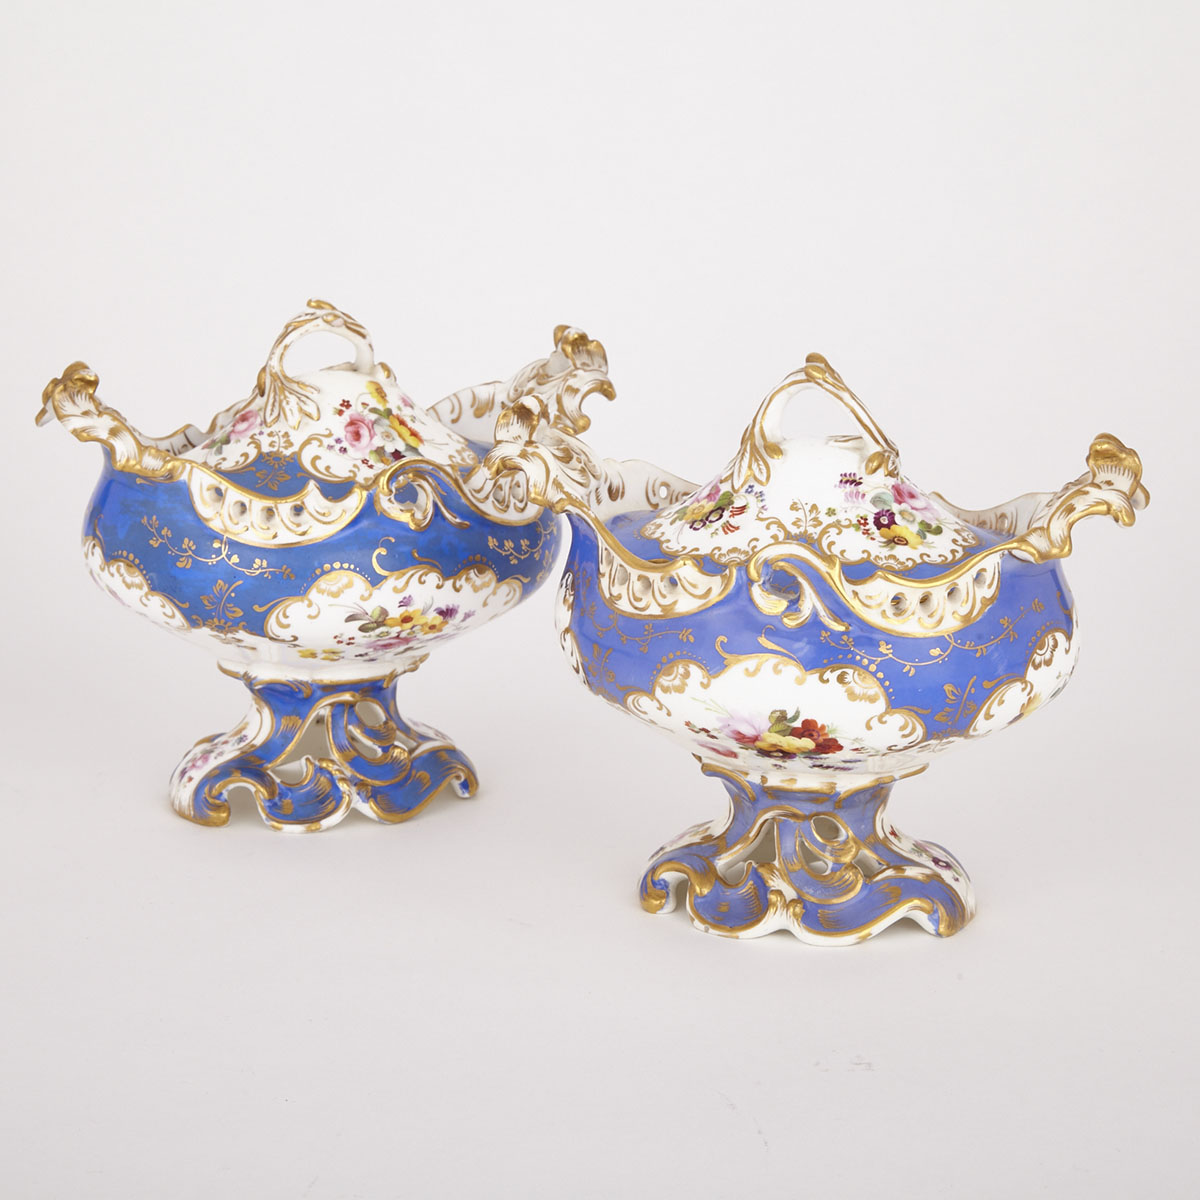 Pair of English Porcelain Covered Sauce Tureens, c.1840